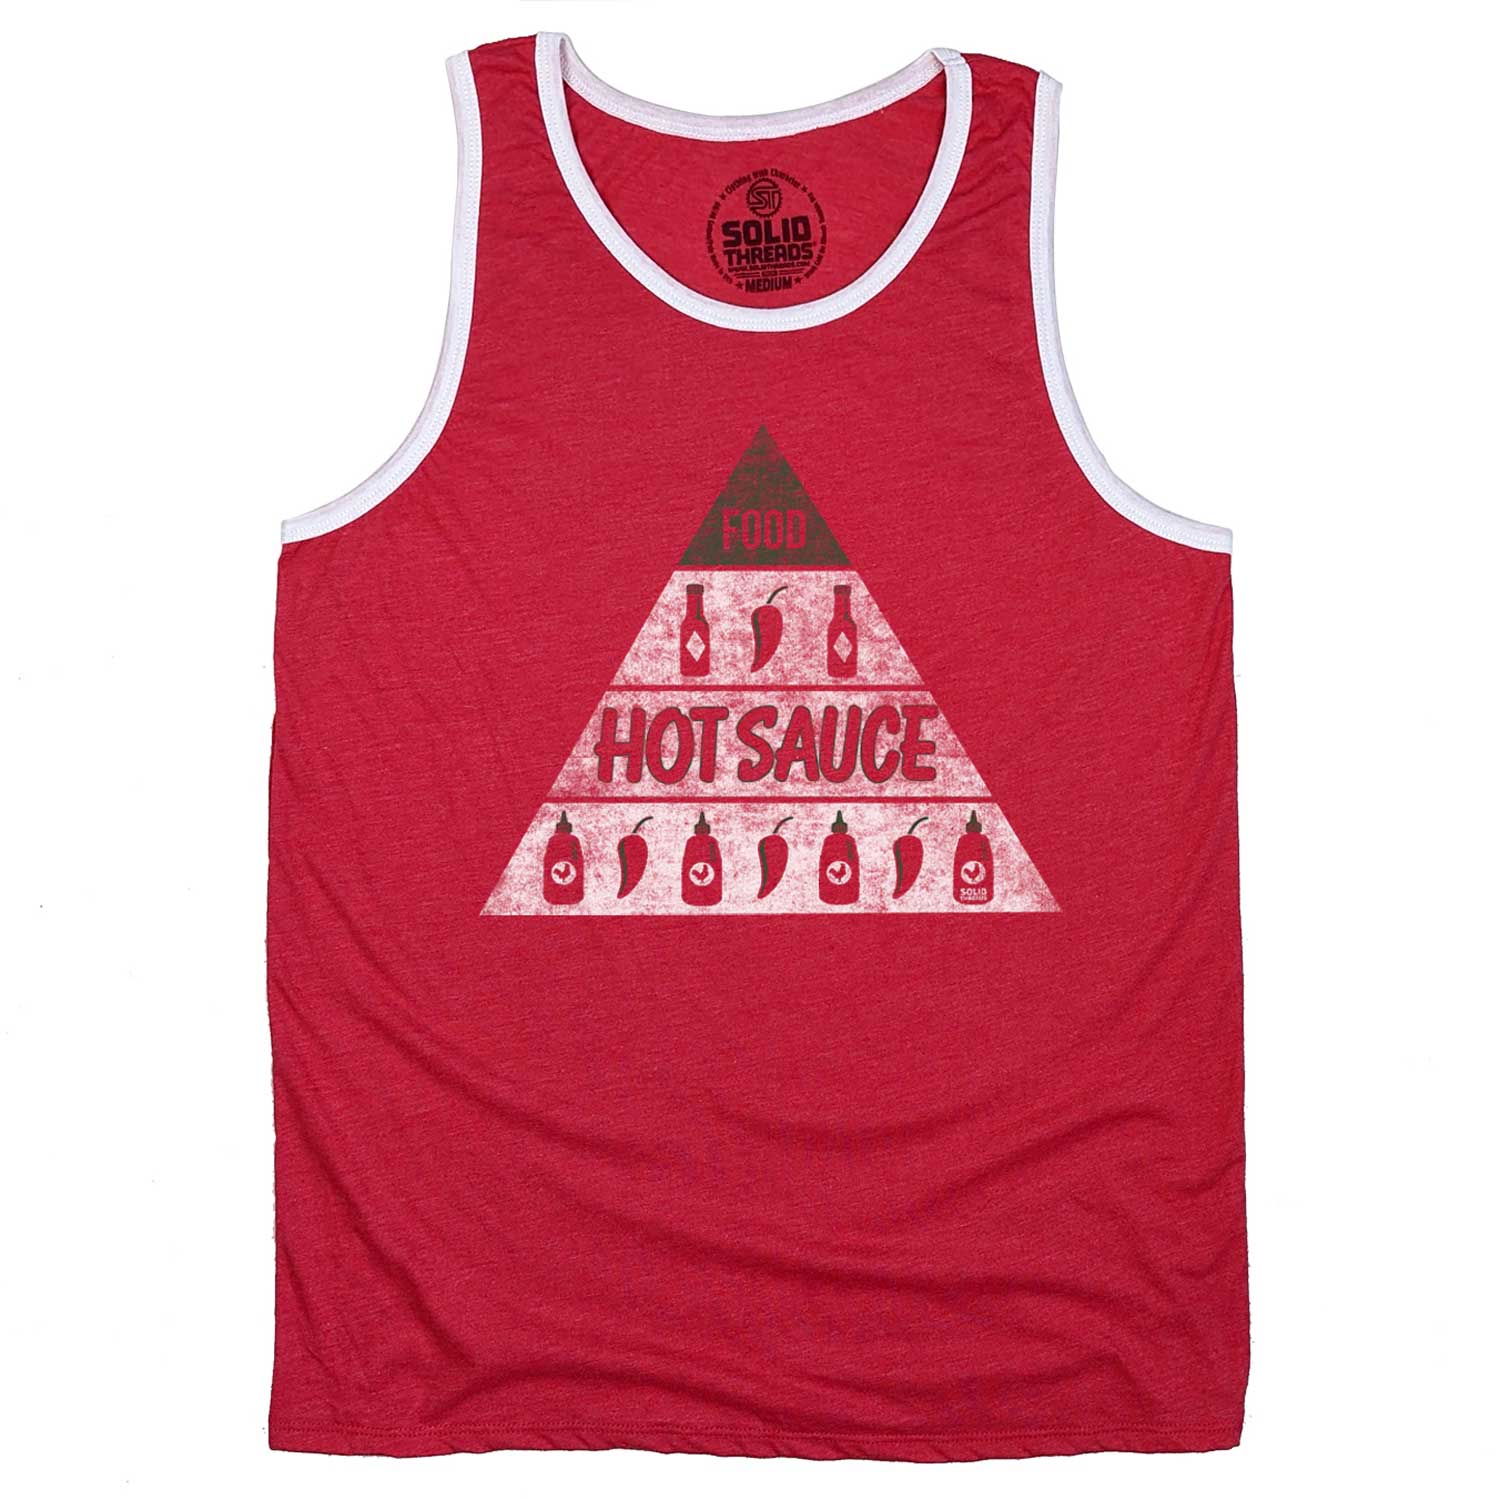 Men's Hot Sauce Vintage Graphic Tank Top | Funny Spicy Food Pyramid Sleeveless Shirt | Solid Threads